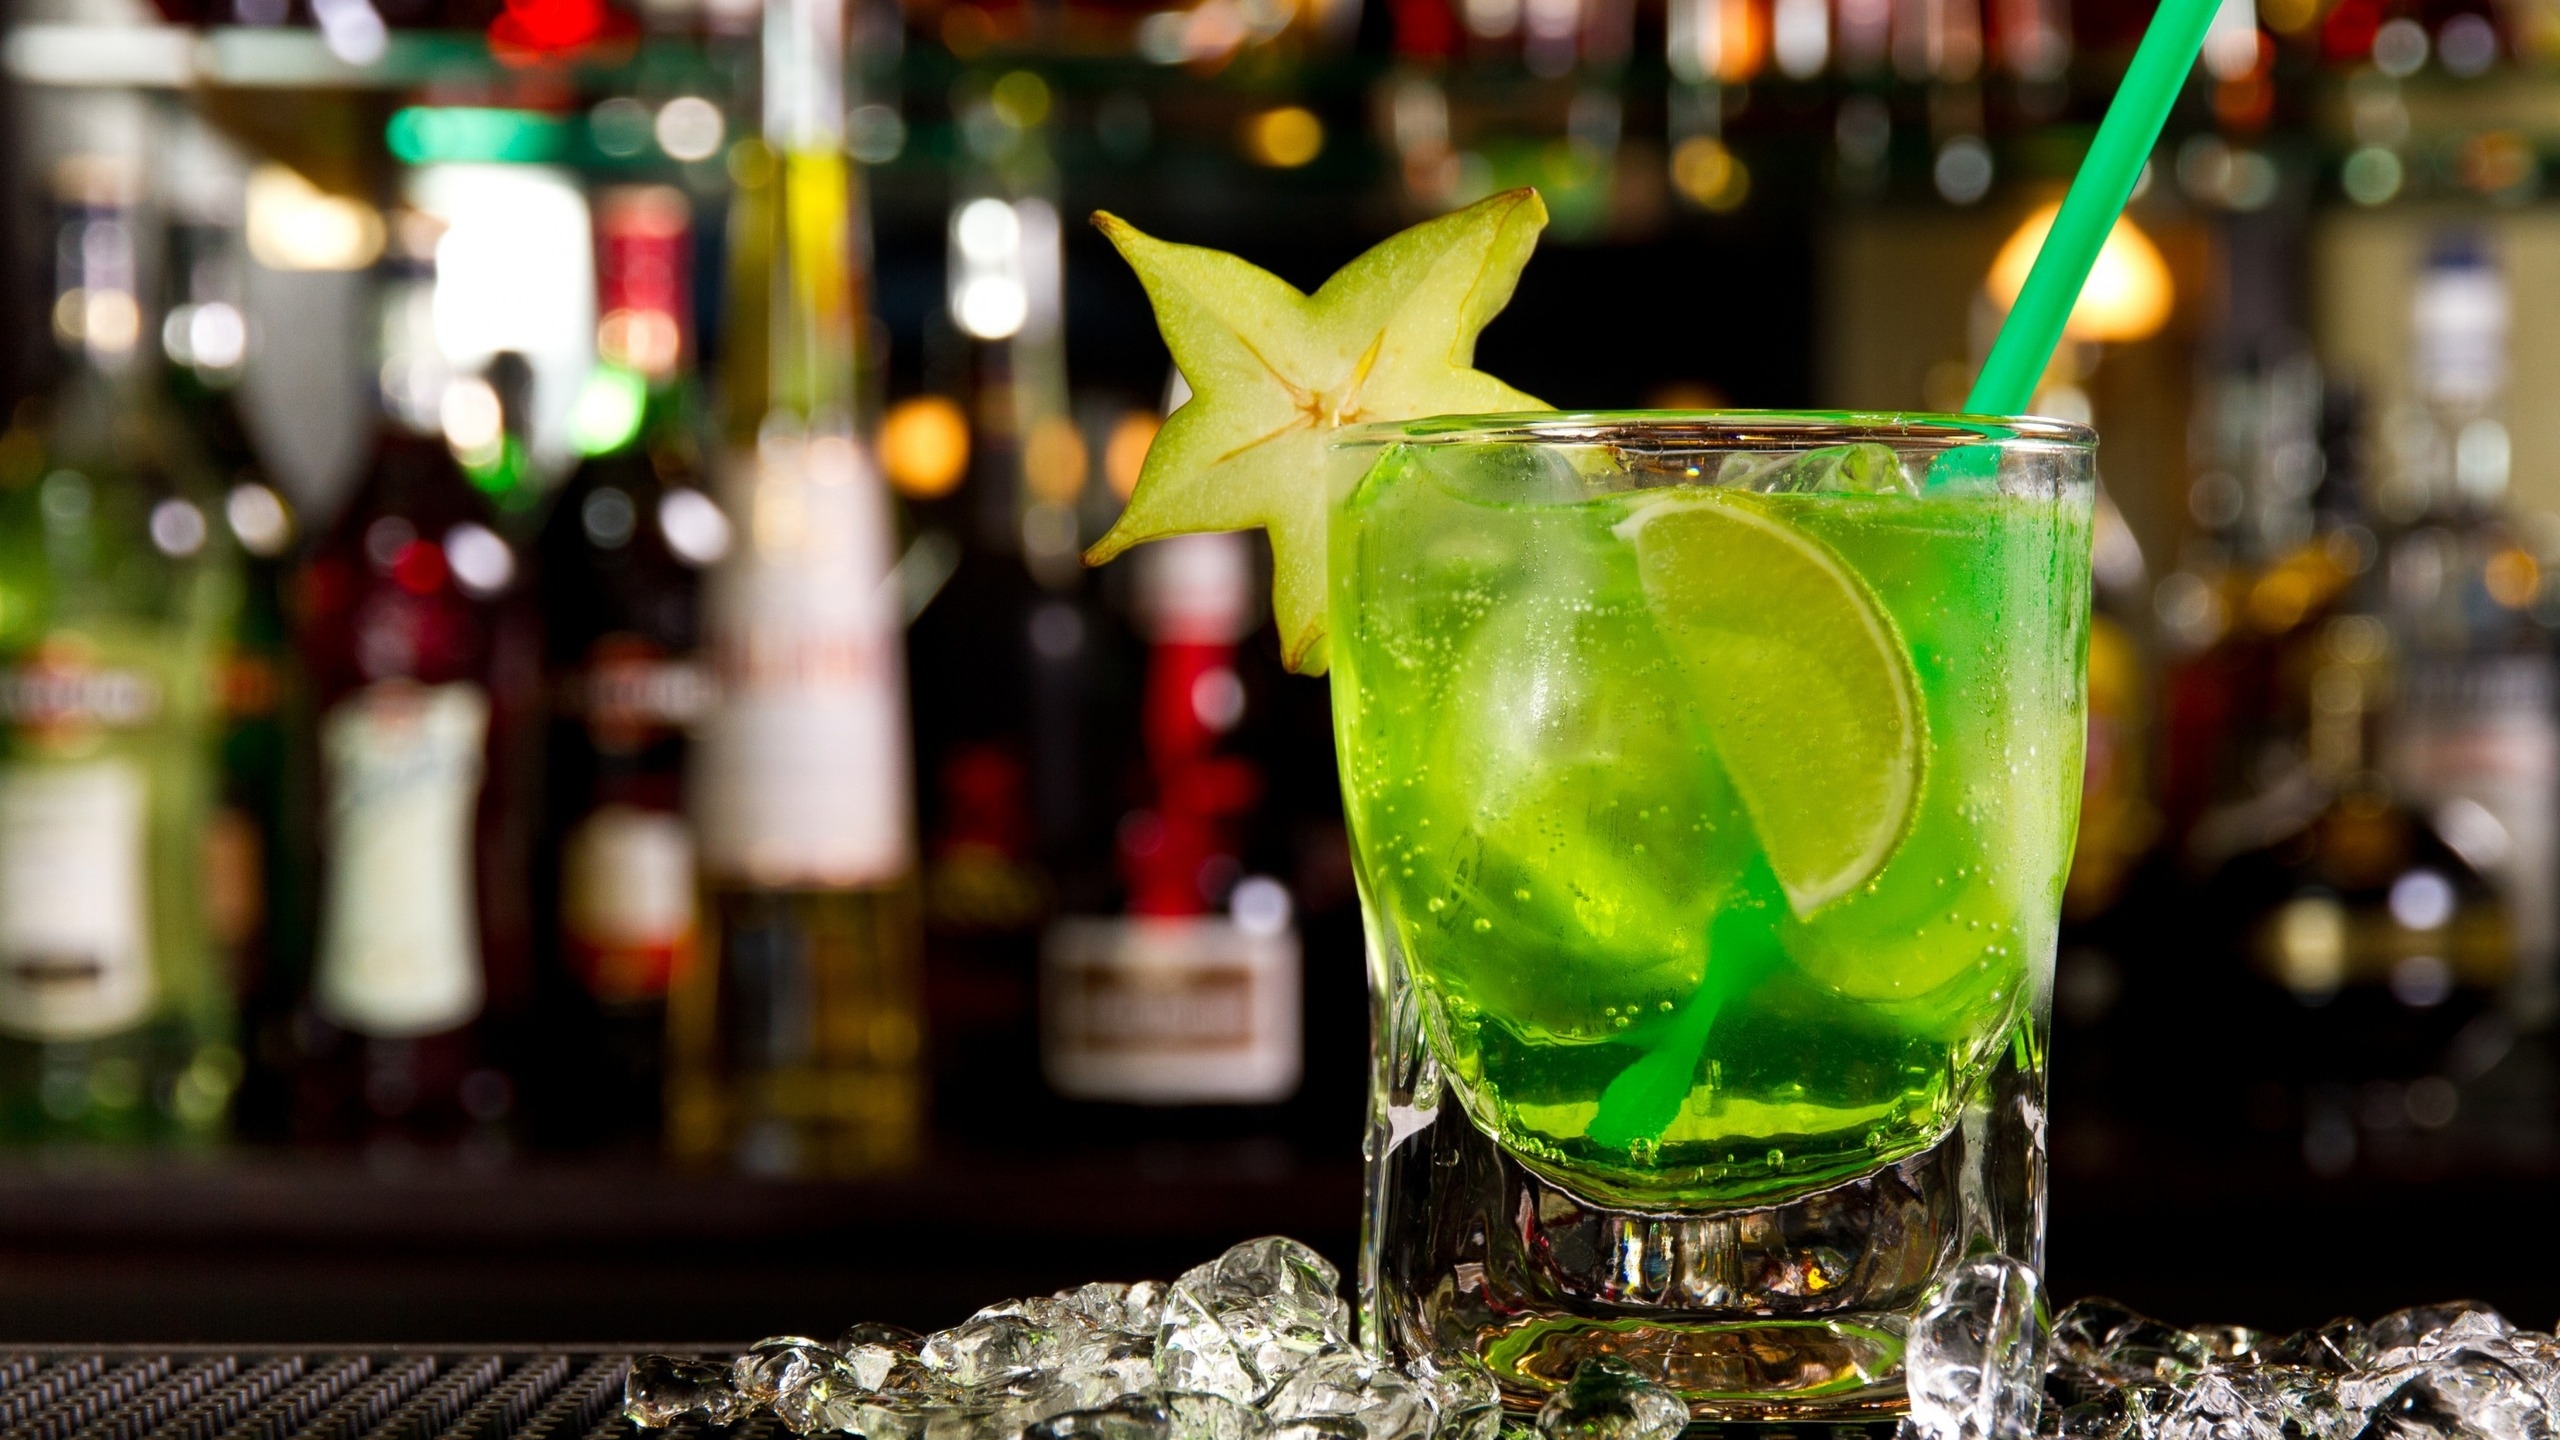 Lime Cocktail for 2560x1440 HDTV resolution